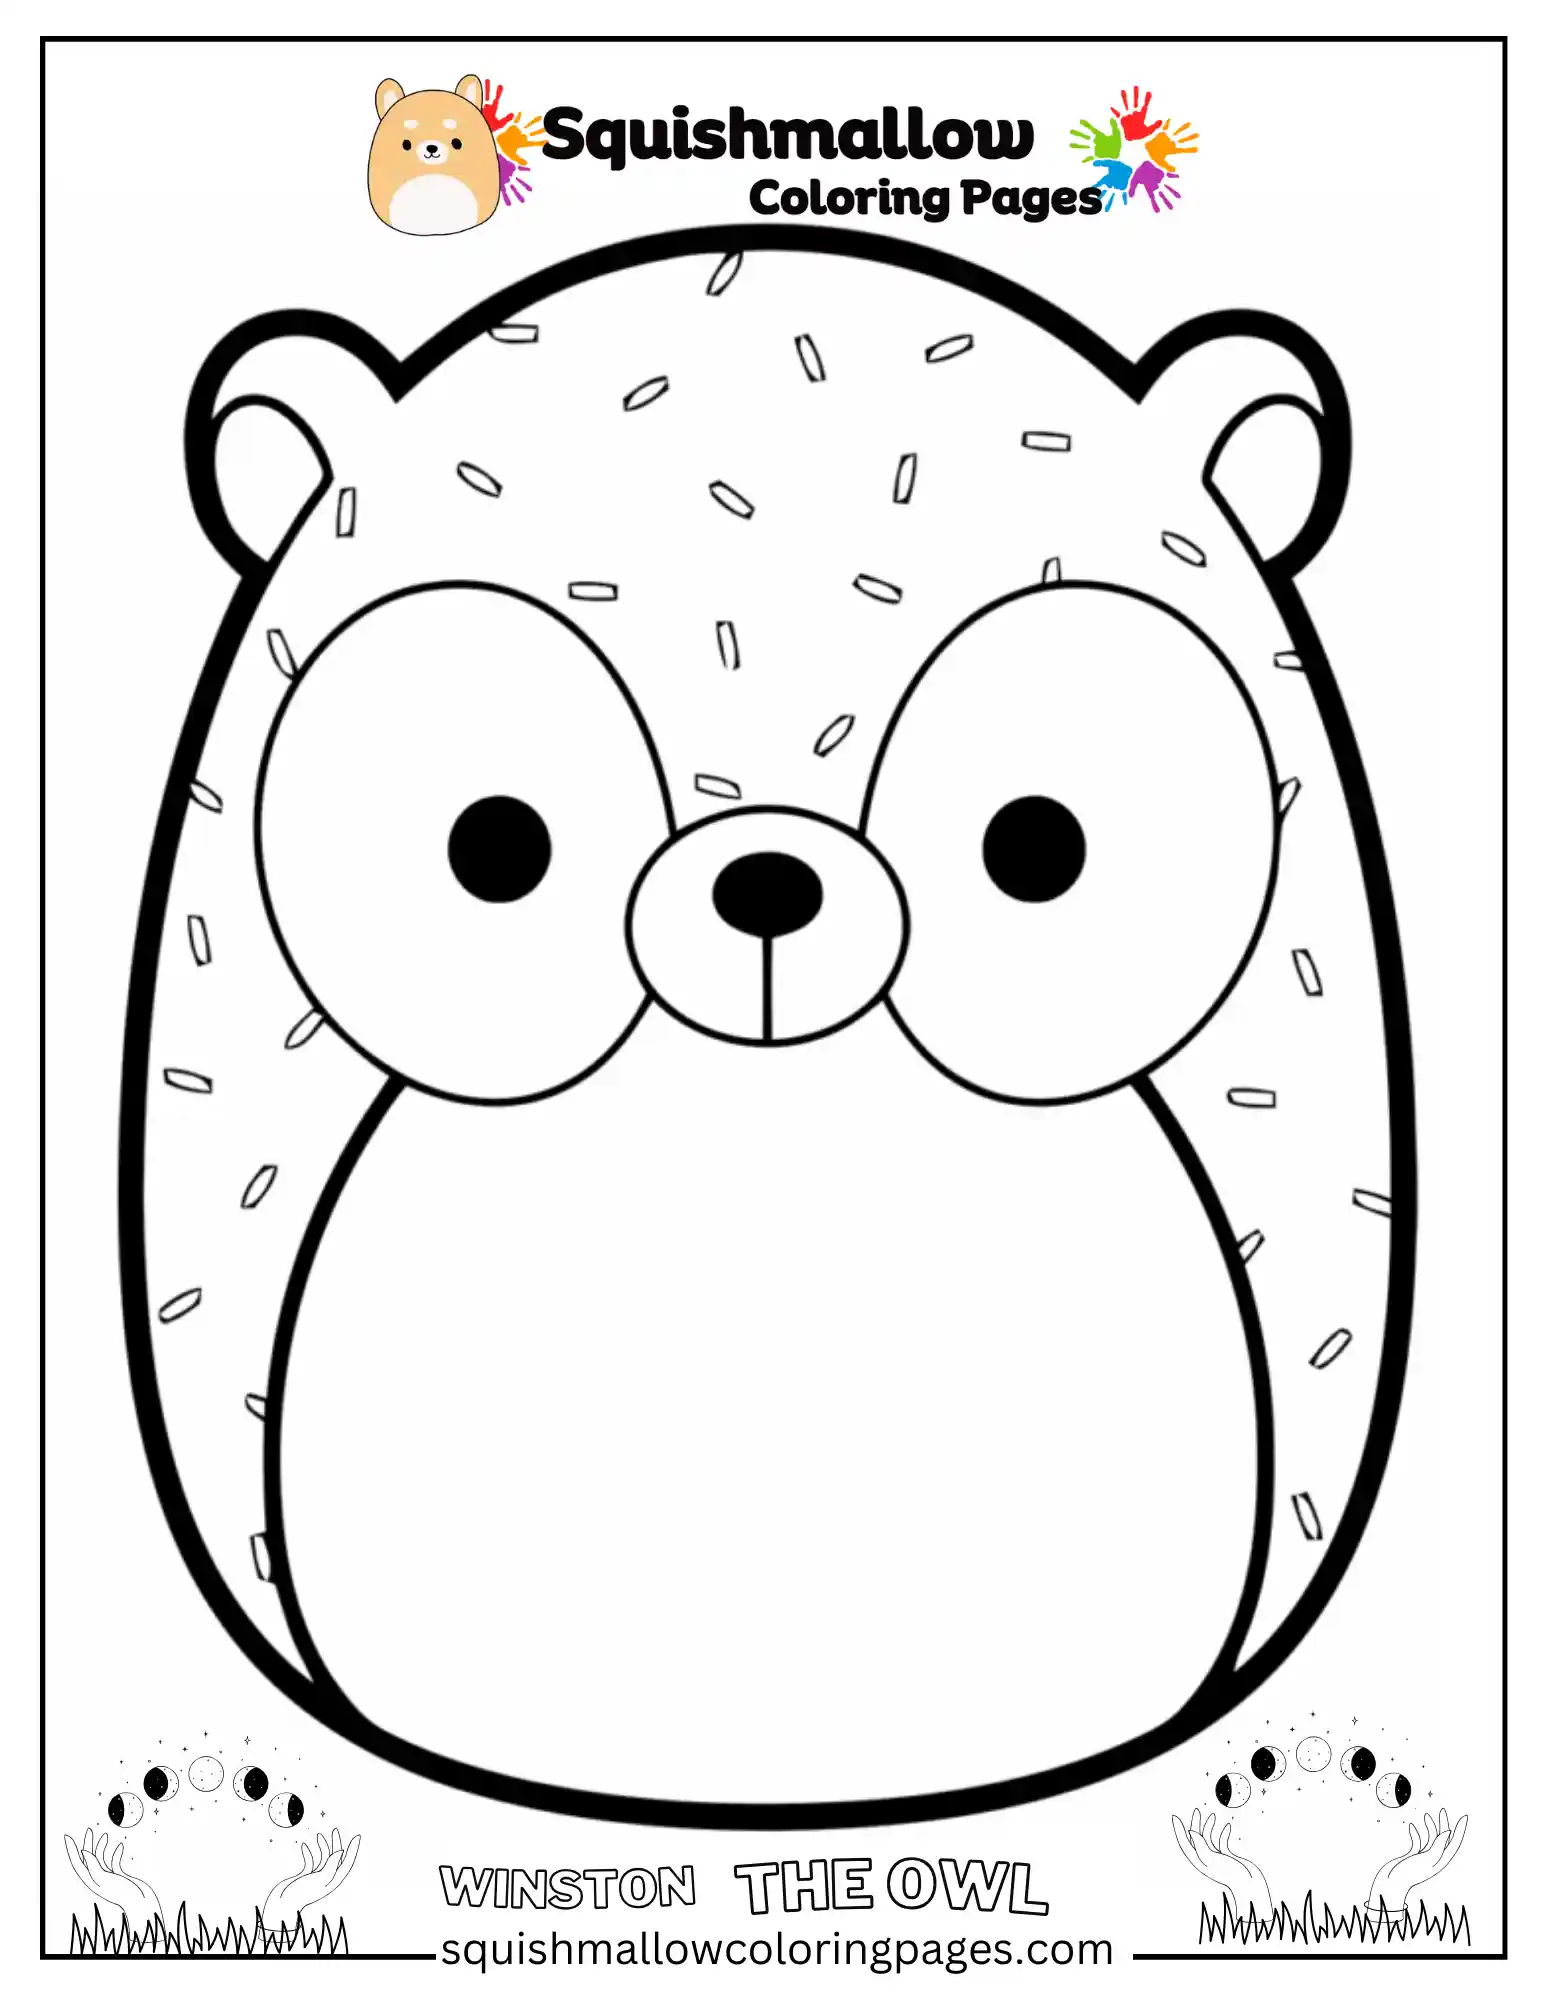 Winston The Owl Squishmallow Coloring Pages